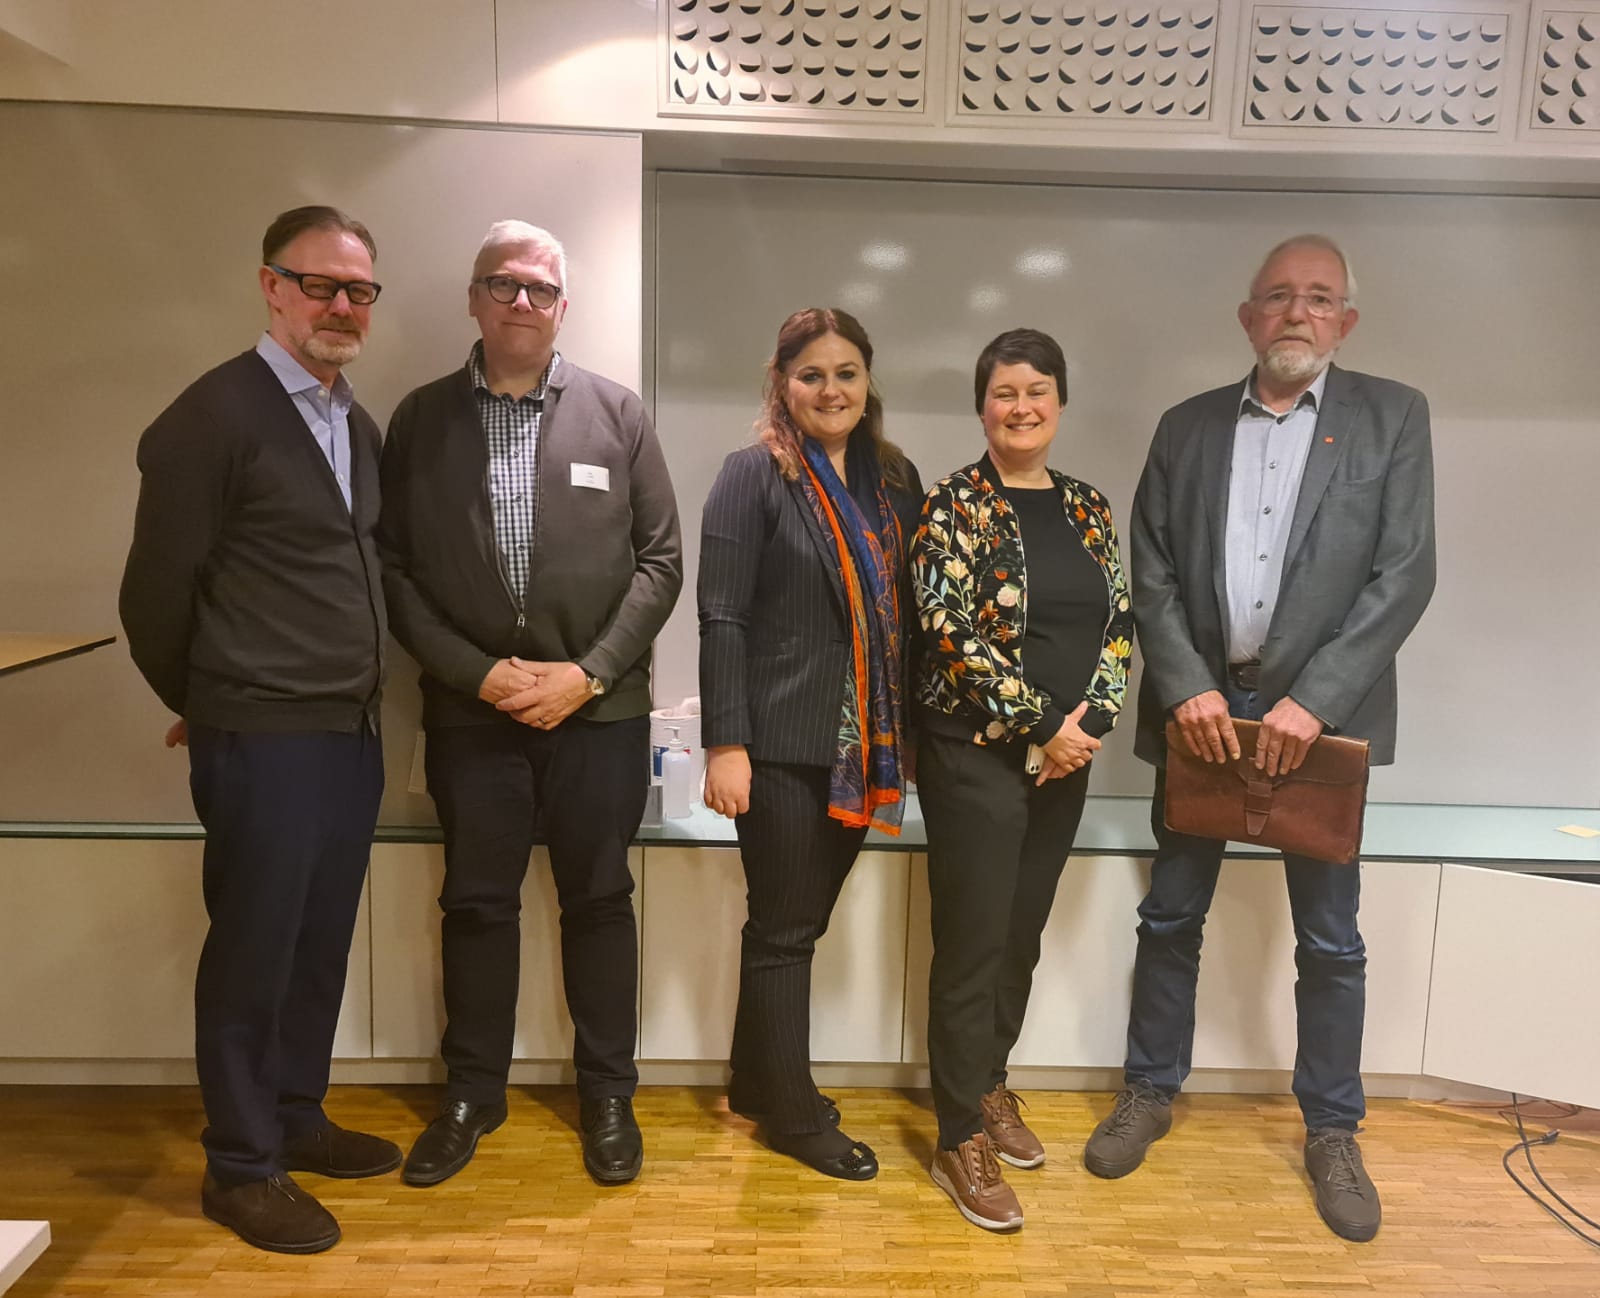 RCC ESAP 2 Team Leader Amira Ramhorst (in the middle) with representatives of employers' and employees' associations, and Labour Inspectorate in Norway during the Study Visit 27-28 April 2022 (Photo: RCC ESAP 2)  